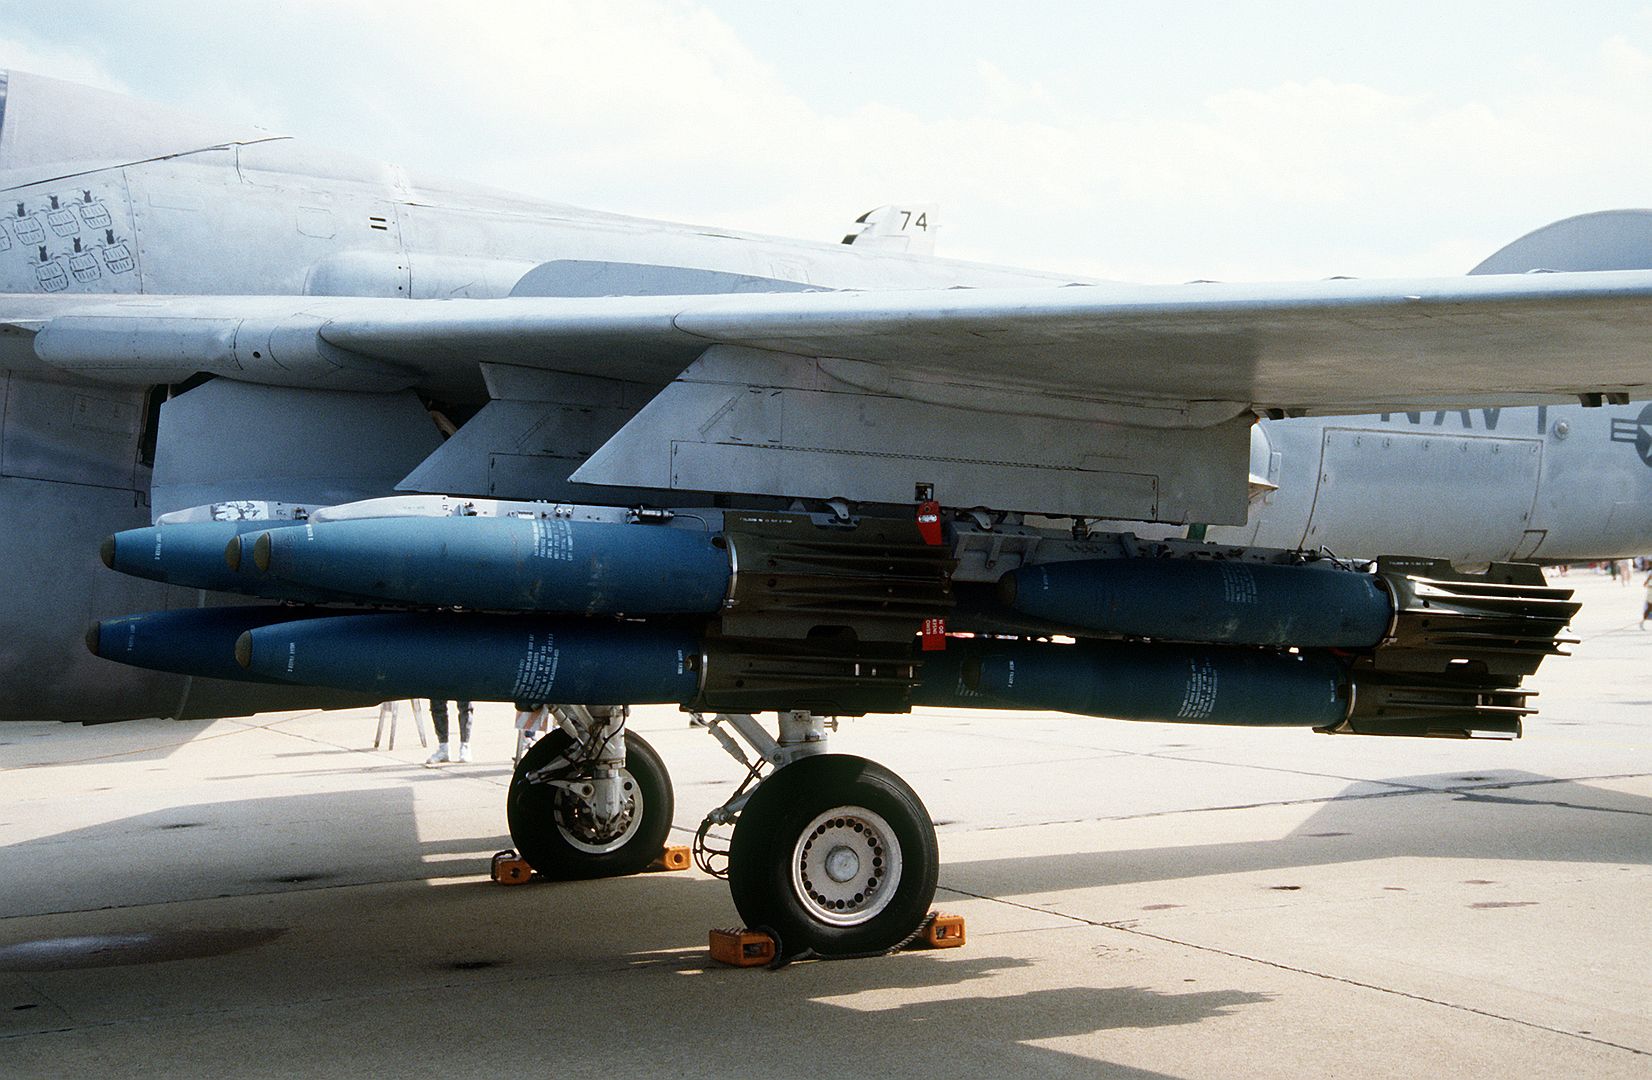 A View Of Several BDU 45 B 500 Pound Practice Bombs Mounted On The Wing Pylons Of An A 6E Intruder Aircraft On Display At An Open House And Air Show